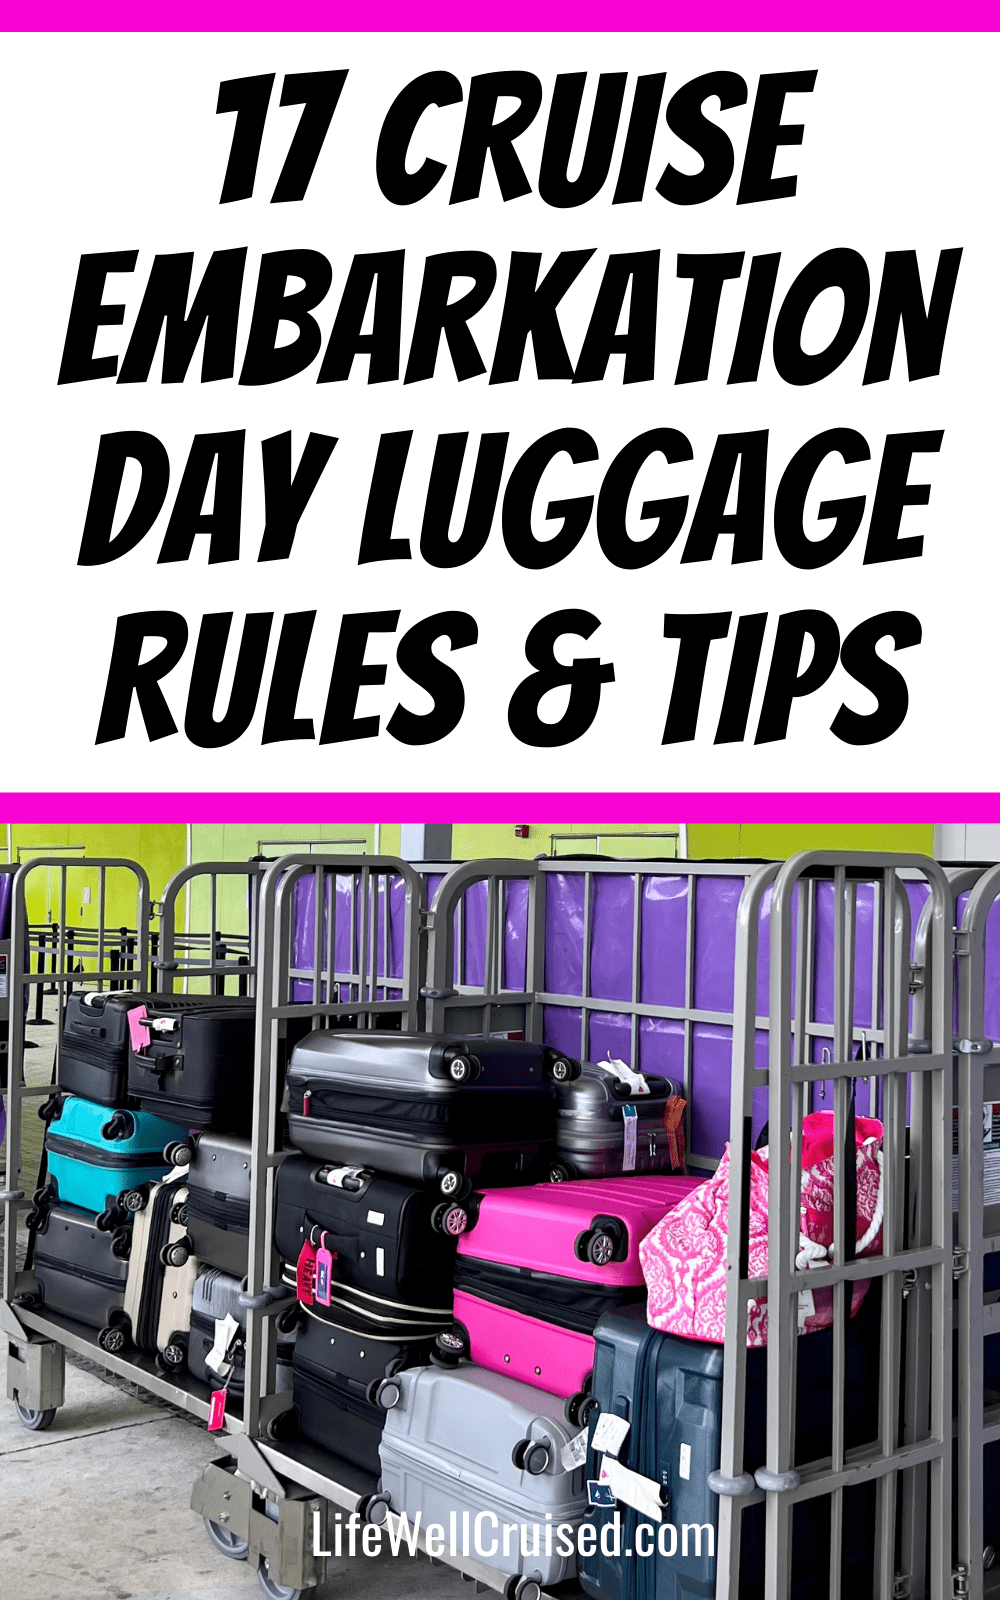 cruise-embarkation-day-luggage-rules-tips